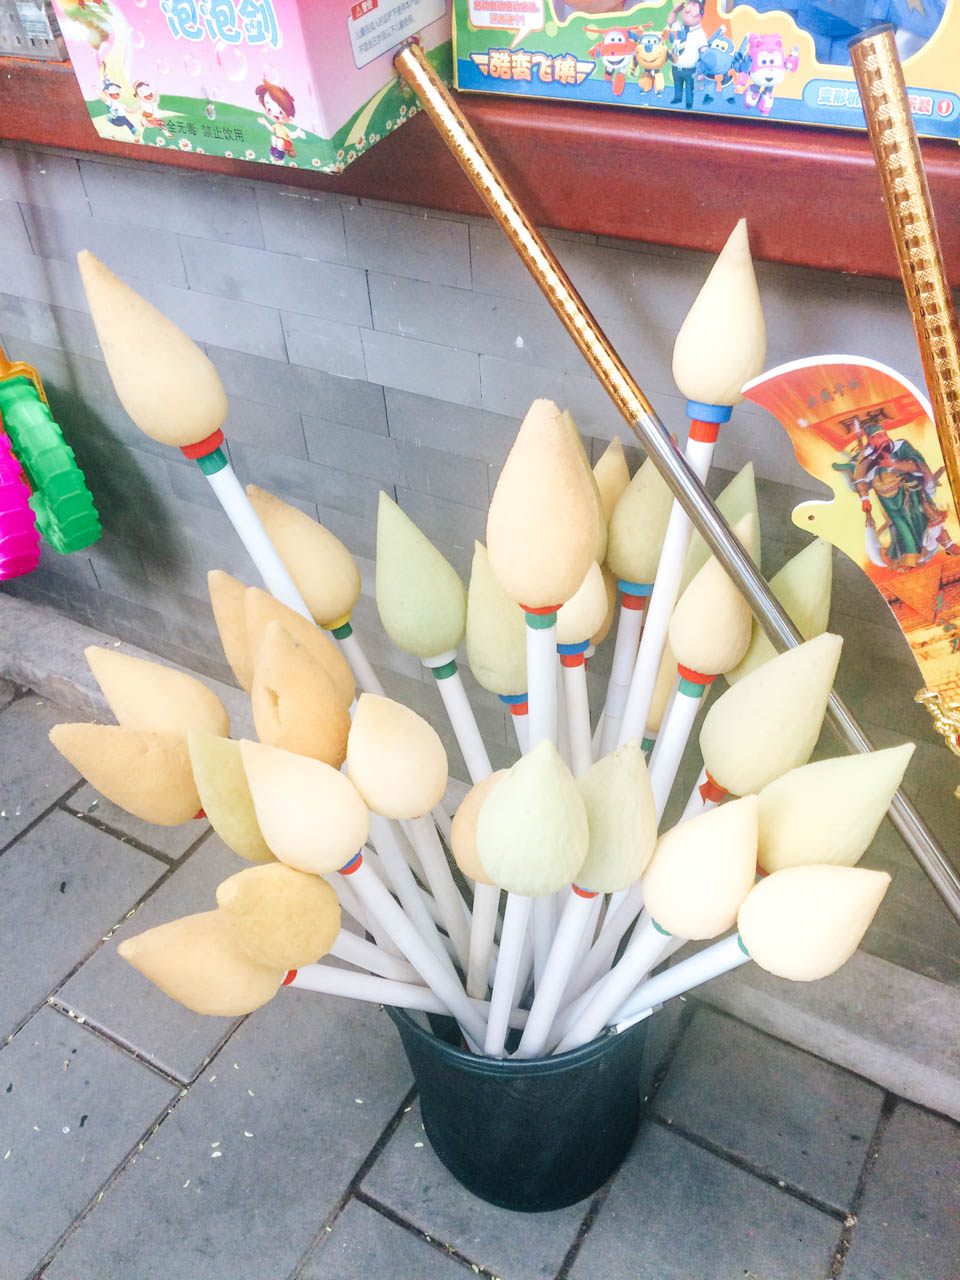 A bucket filled with giant brushes for water calligraphy